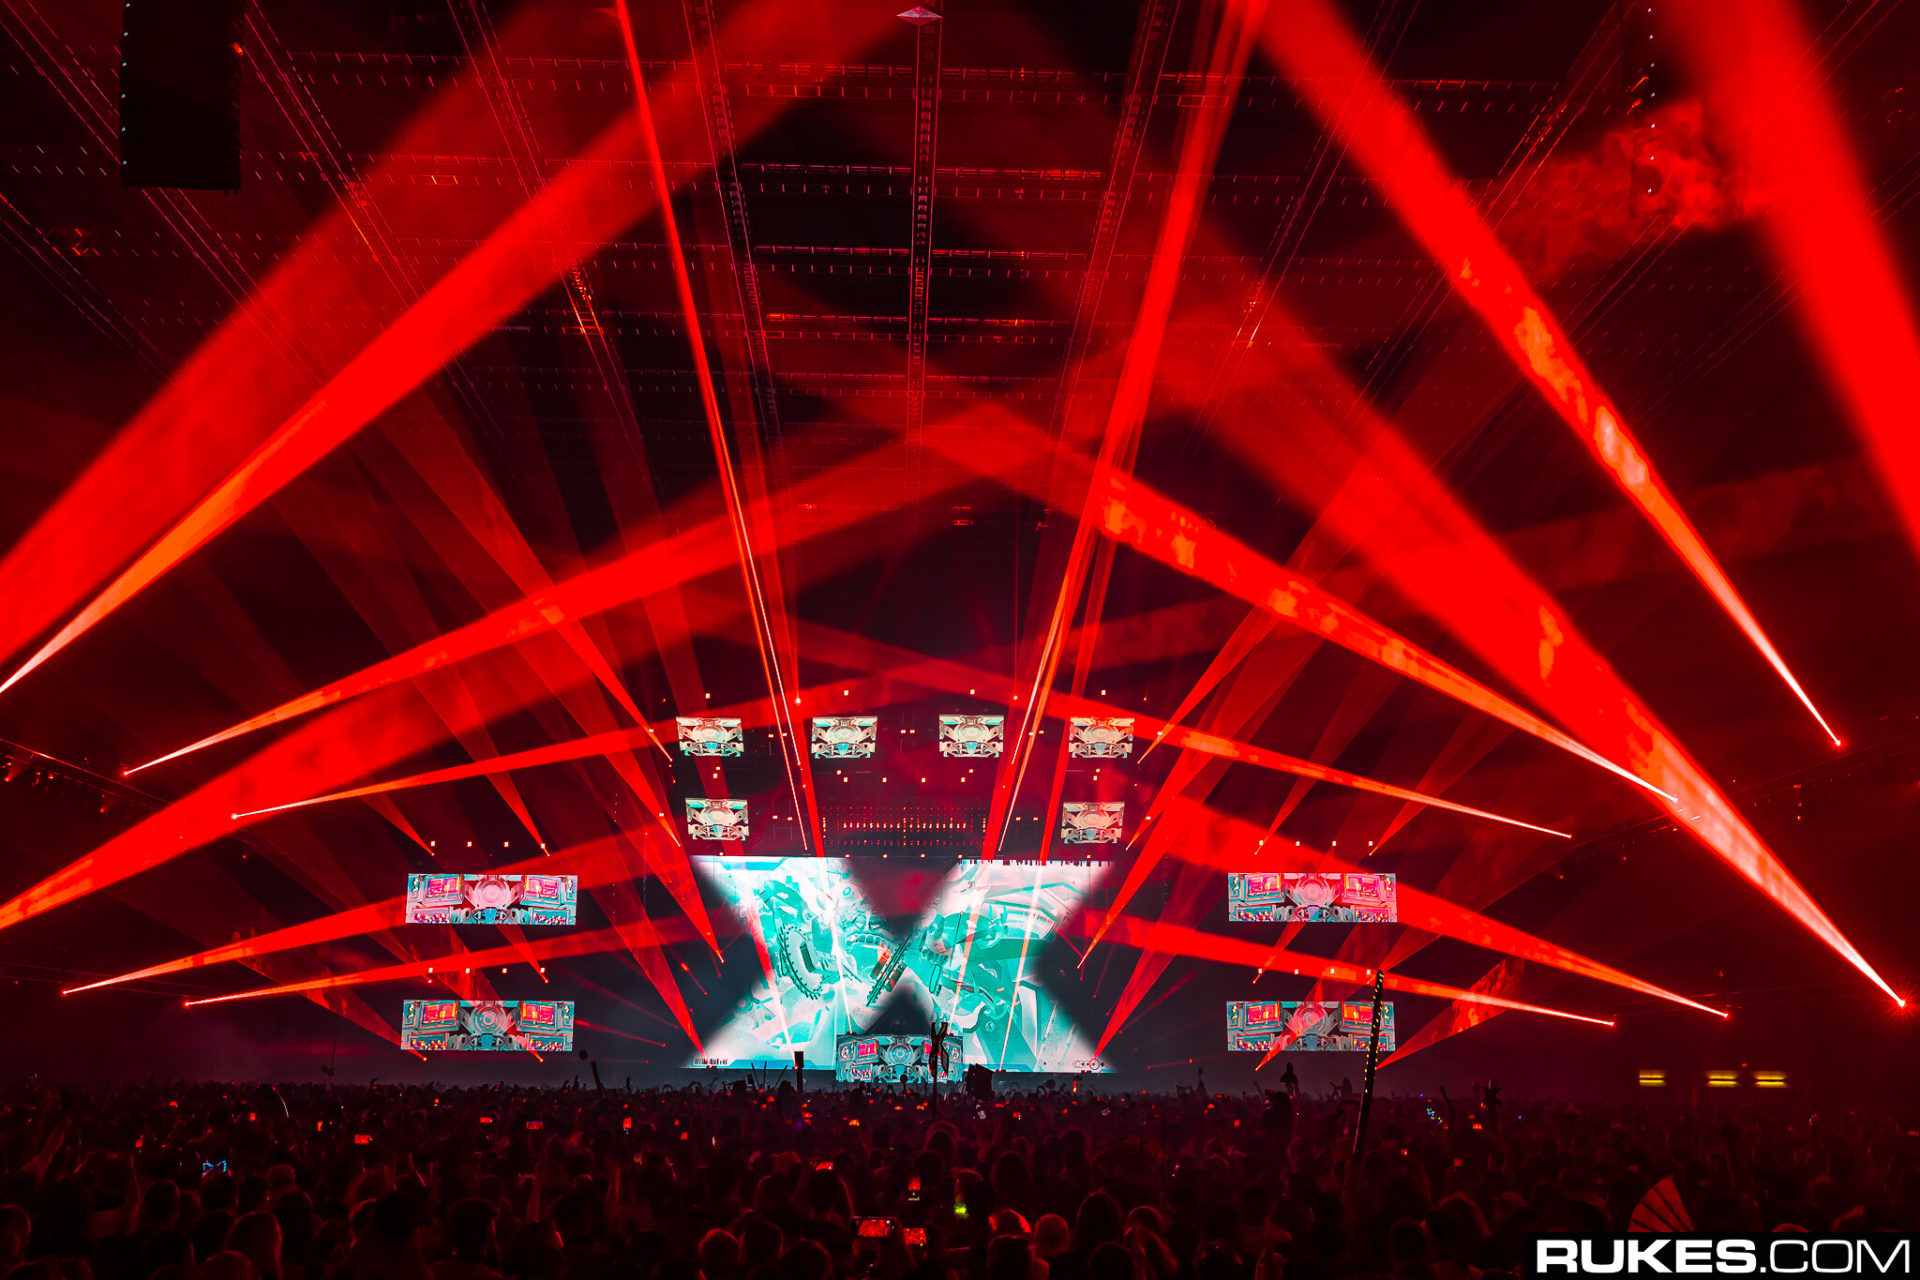 Excision bathes the crowd in red lazers at the Thunderdome tour in Tacoma, WA in 2020